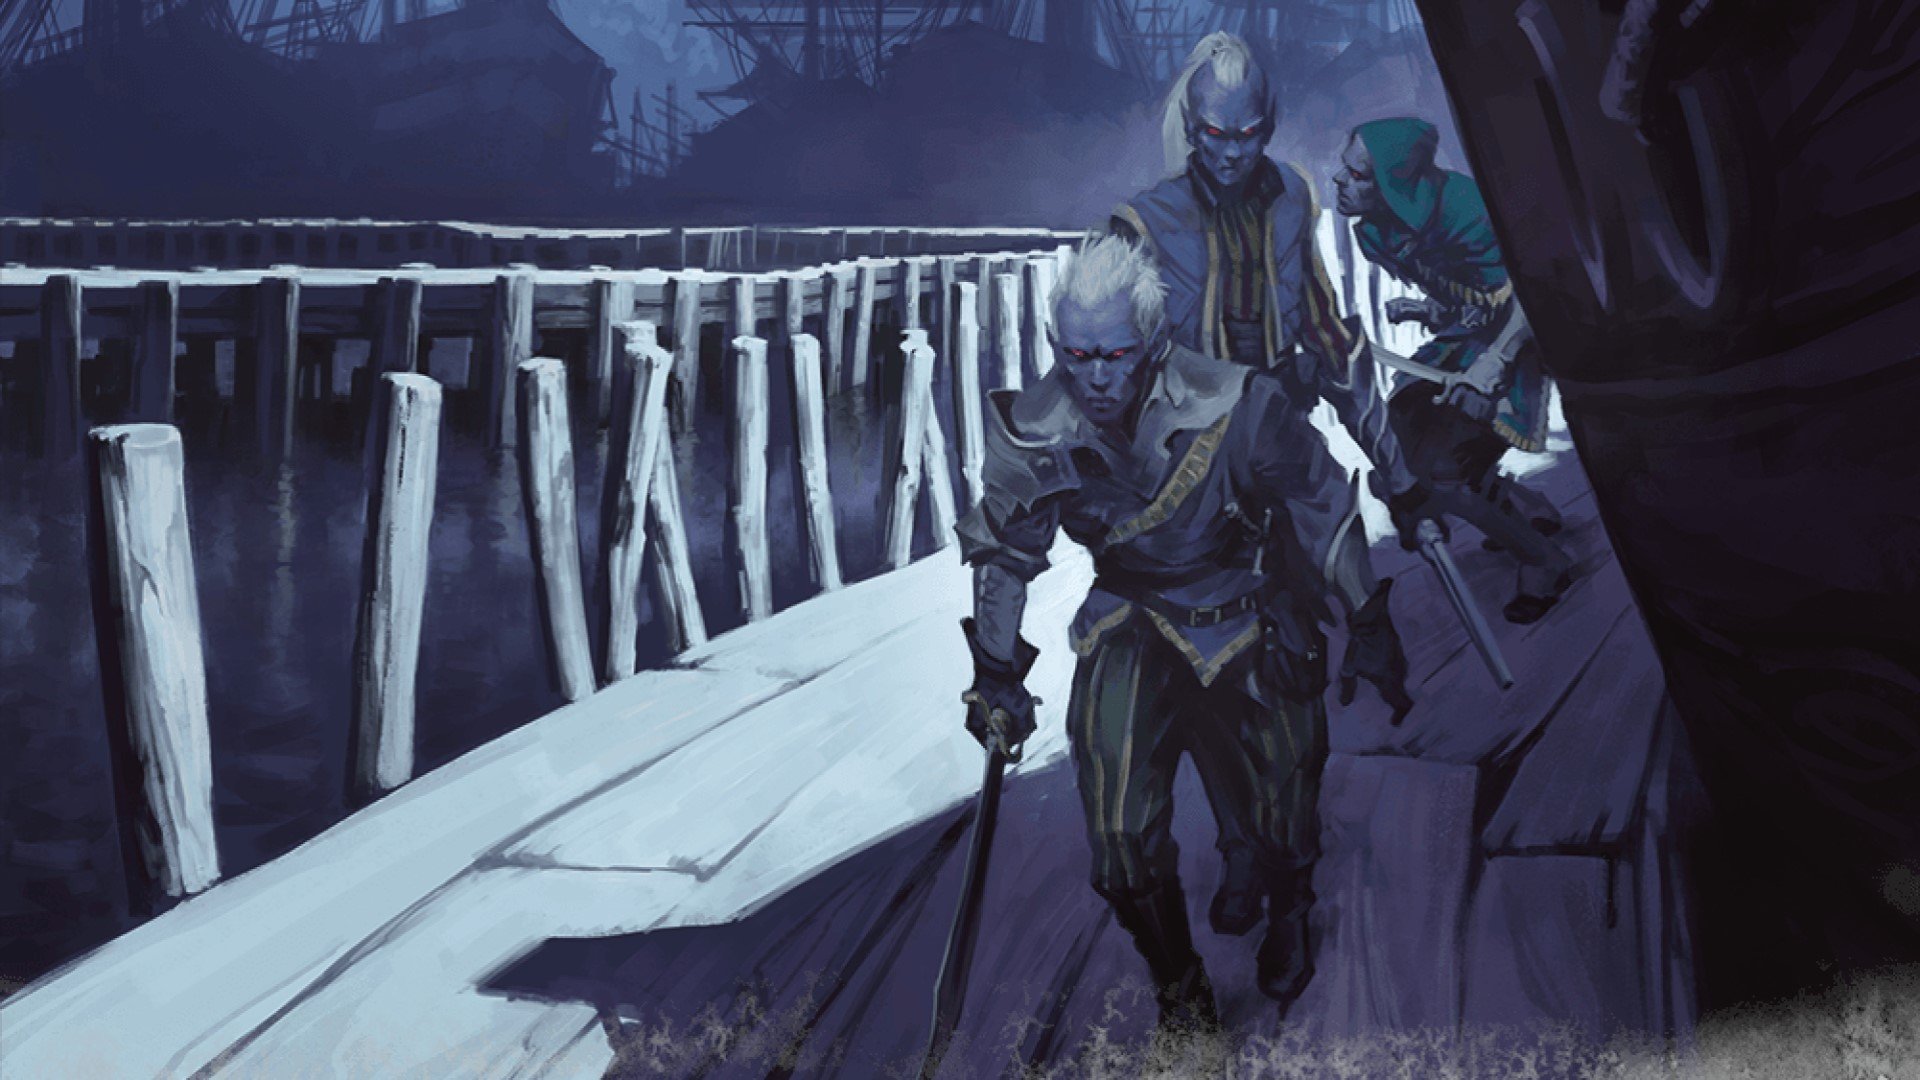 DnD Rogue 5E - Wizards of the Coast artwork showing drow rogues sneaking along a boardwalk